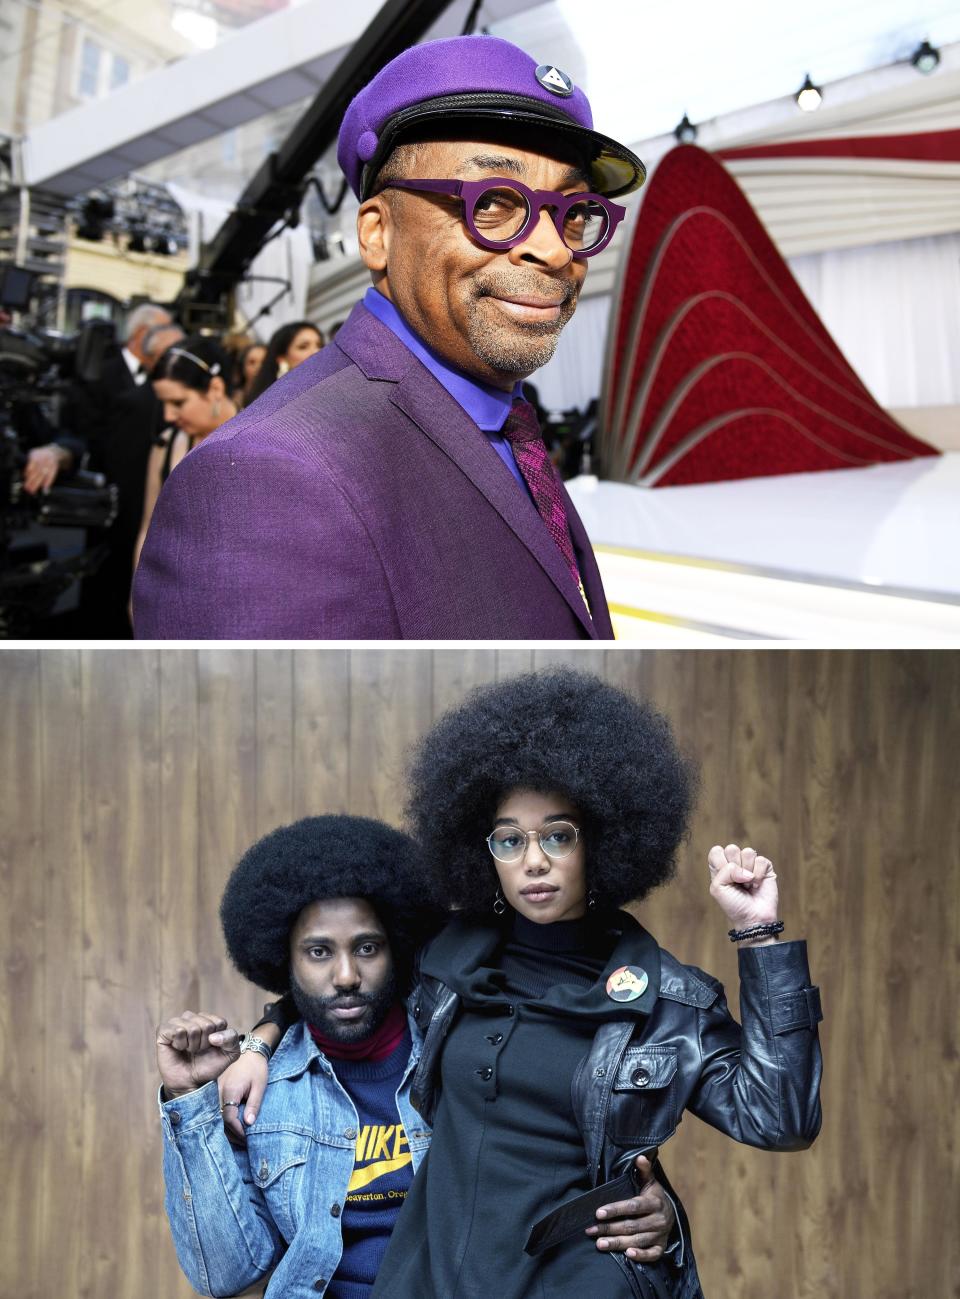 The final few minutes of BlacKkKlansman features real footage from the deadly Charlottesville rally in 2017. Spike explained his experience watching it with an audience and coming up with the ending, saying, 